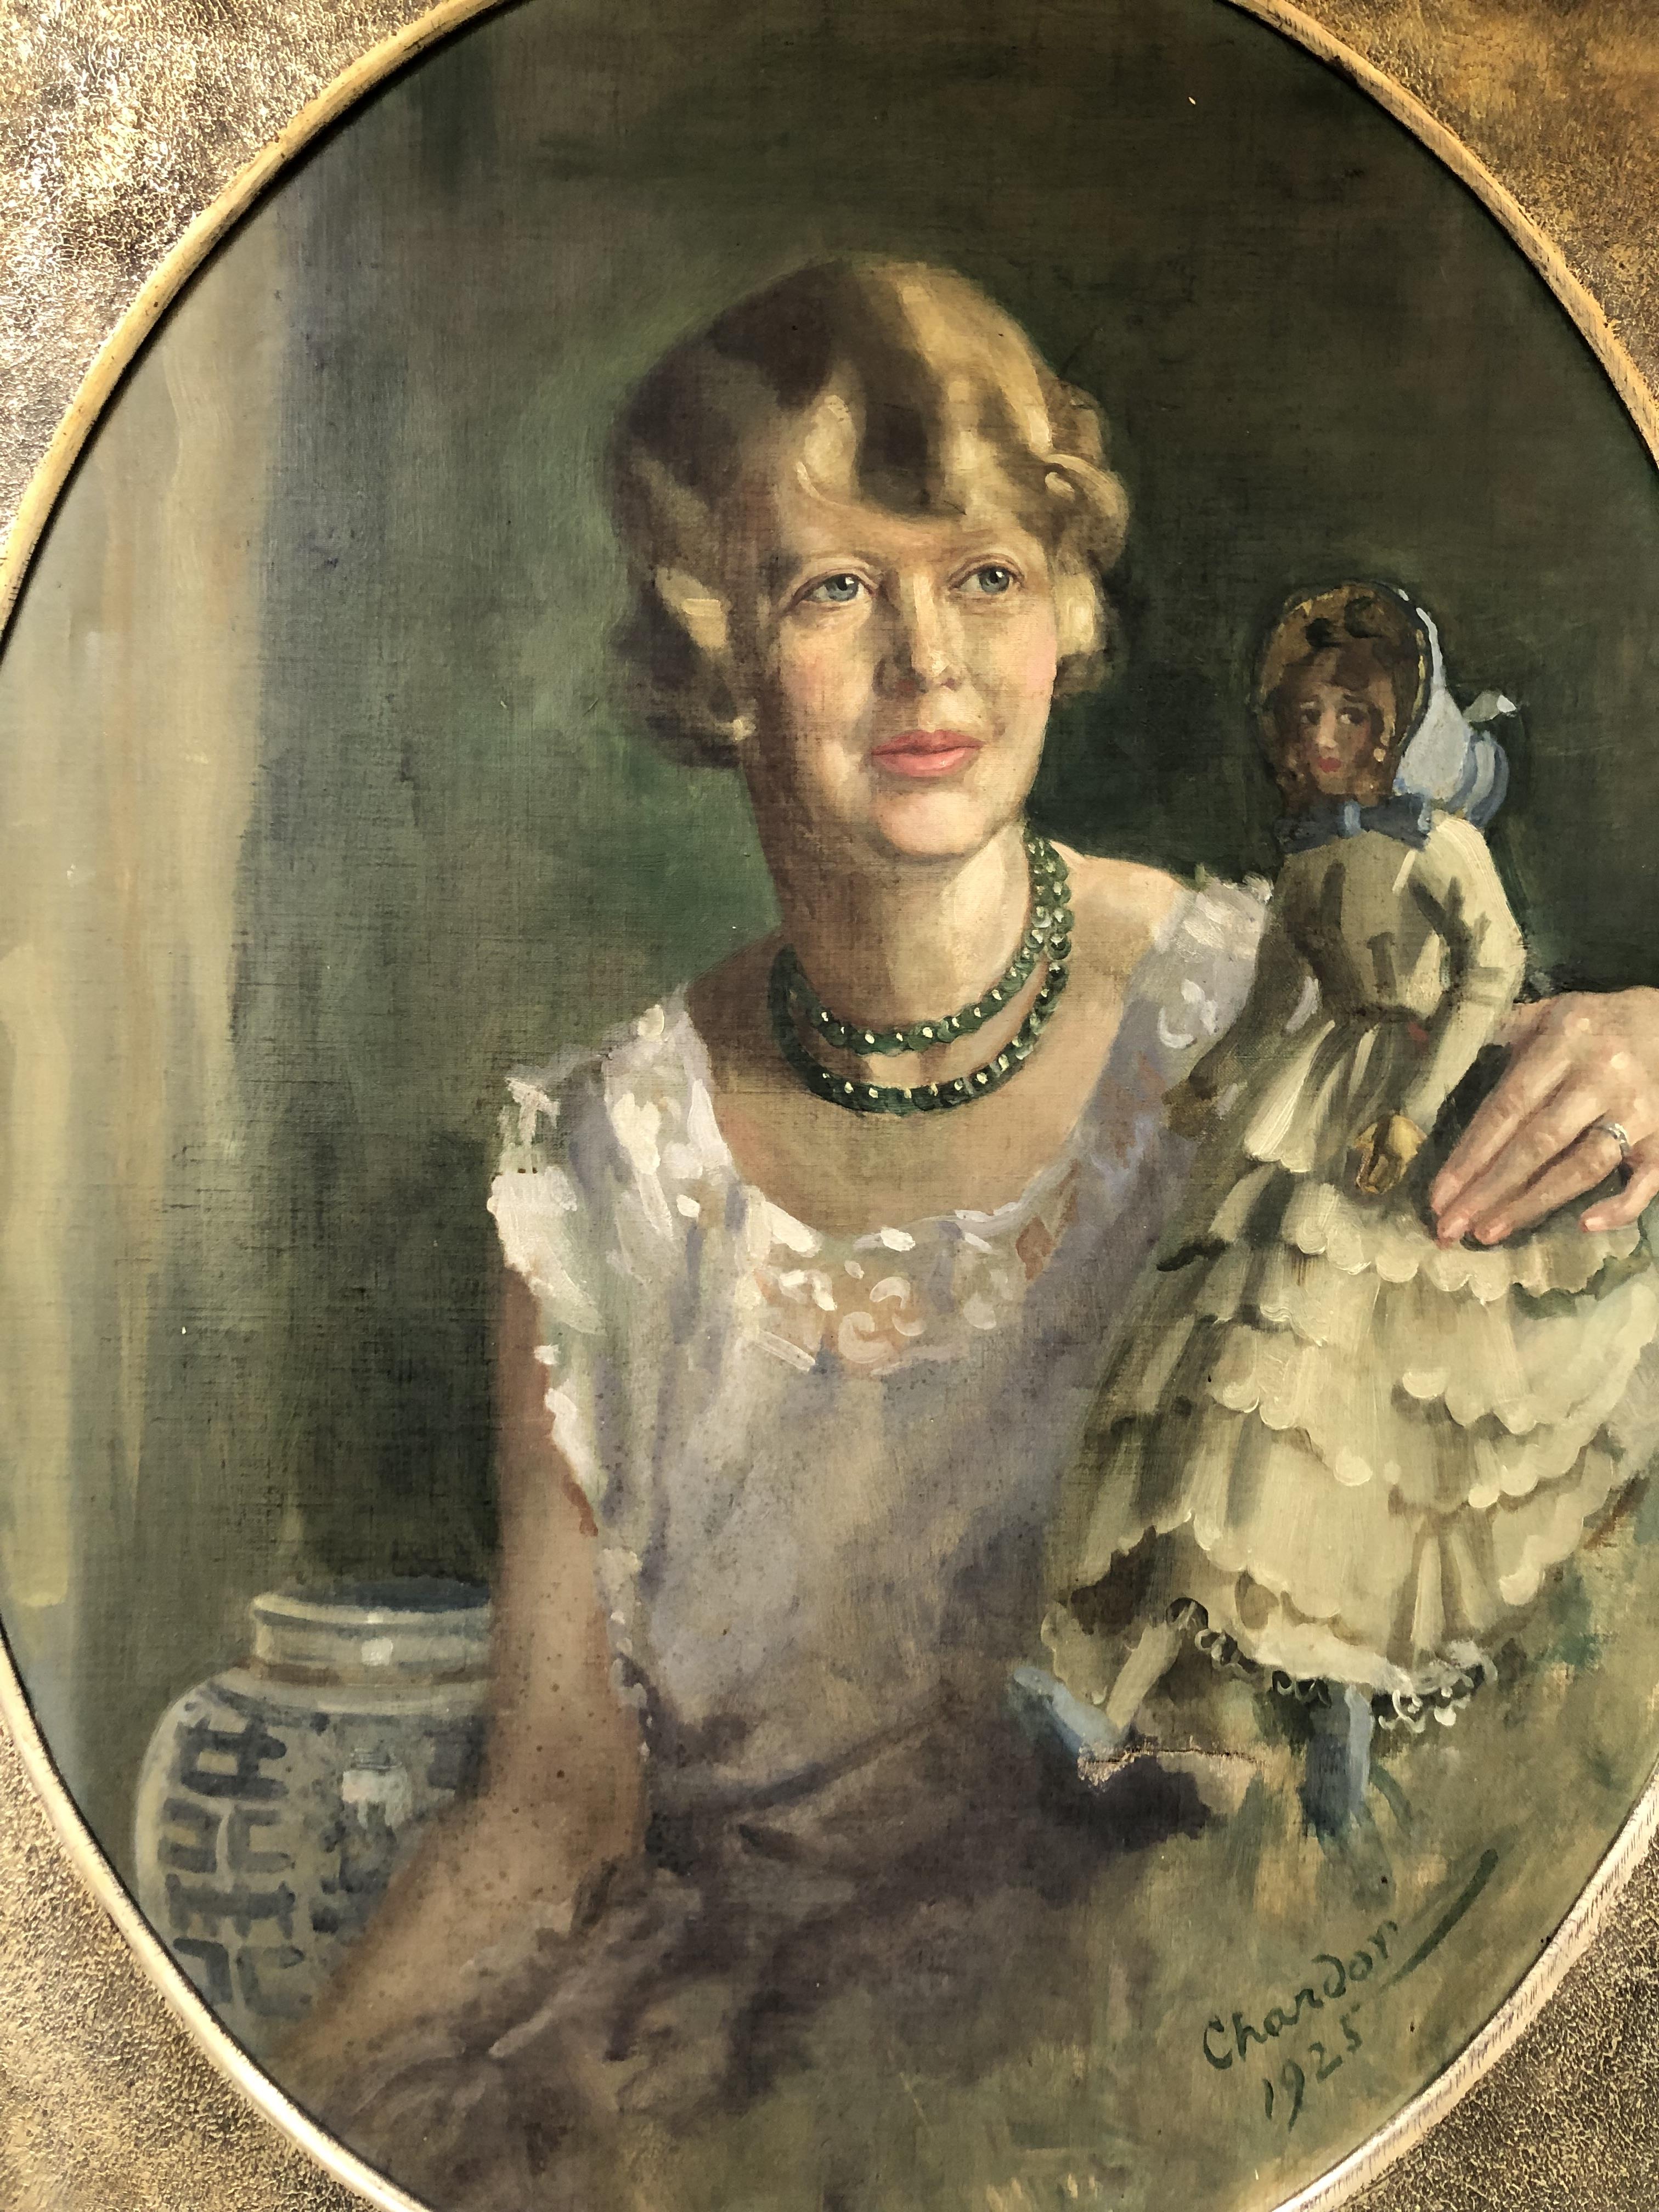 DOUGLAS GRANVILLE CHANDOR (1897-1953) PORTRAIT OF A LADY WITH HER DOLL. OIL ON CANVAS SIGNED L/R - Image 3 of 6